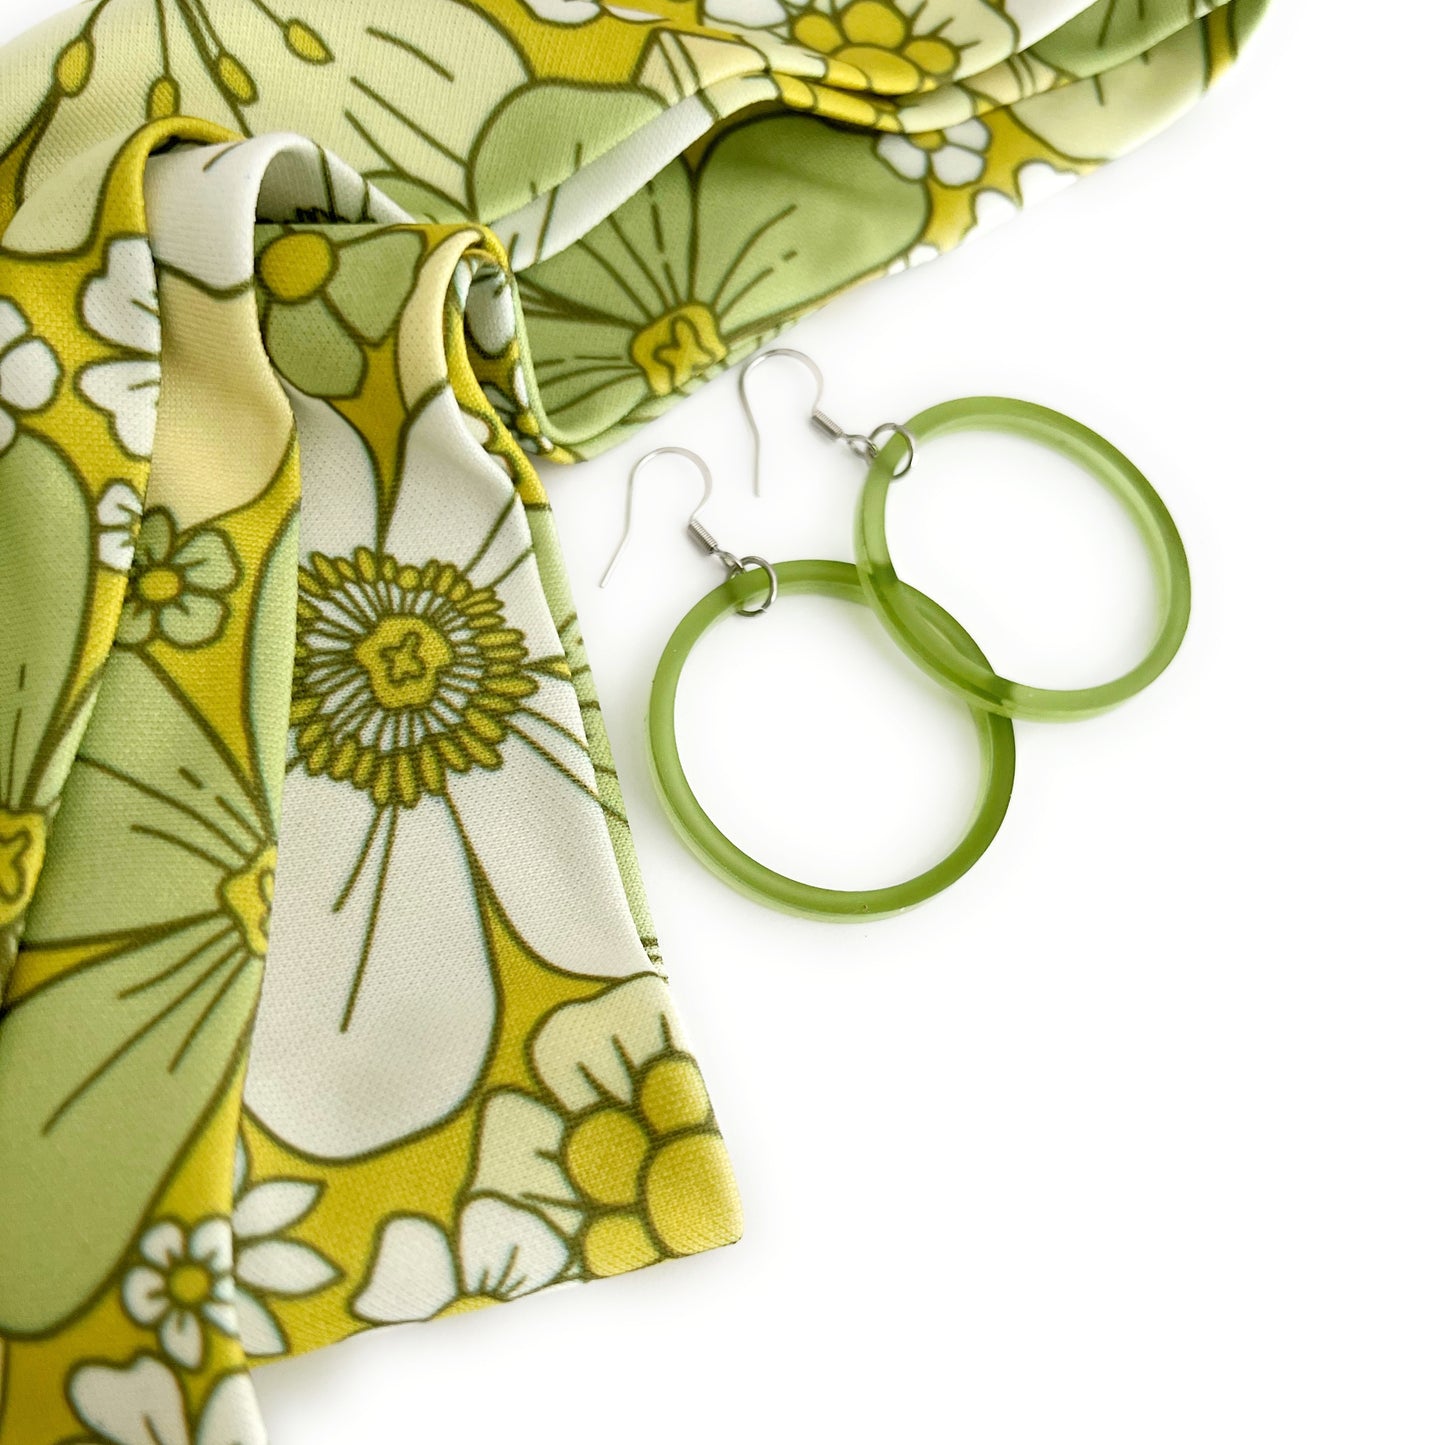 THE BEST EARRINGS/HEADBAND Gift Set in Retro Mustard Yellow & Green Floral + Hoops/ Statement Accessories